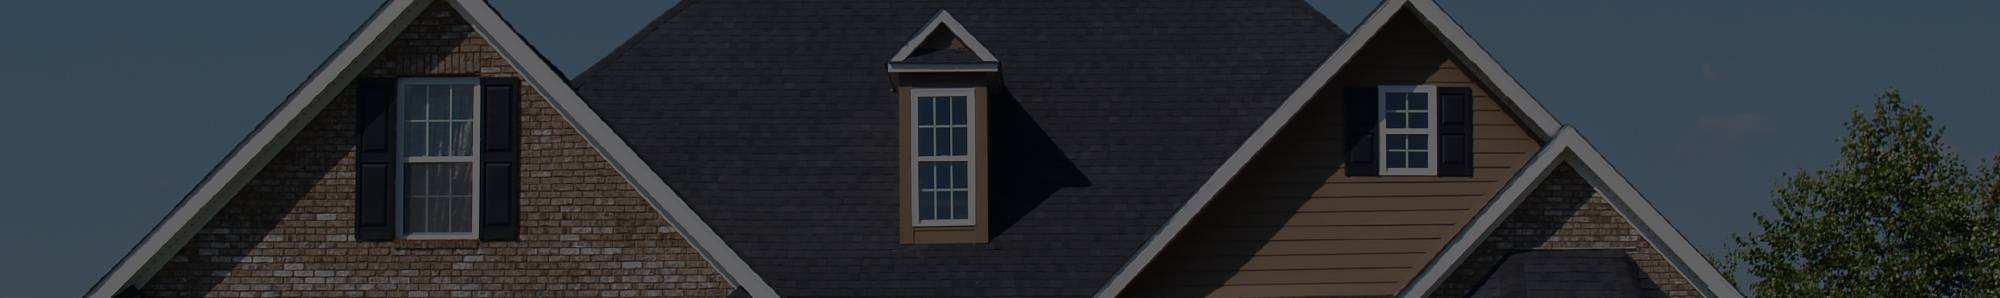 Illinois roofing contractors have a rich history of installing quality windows, siding and roofs